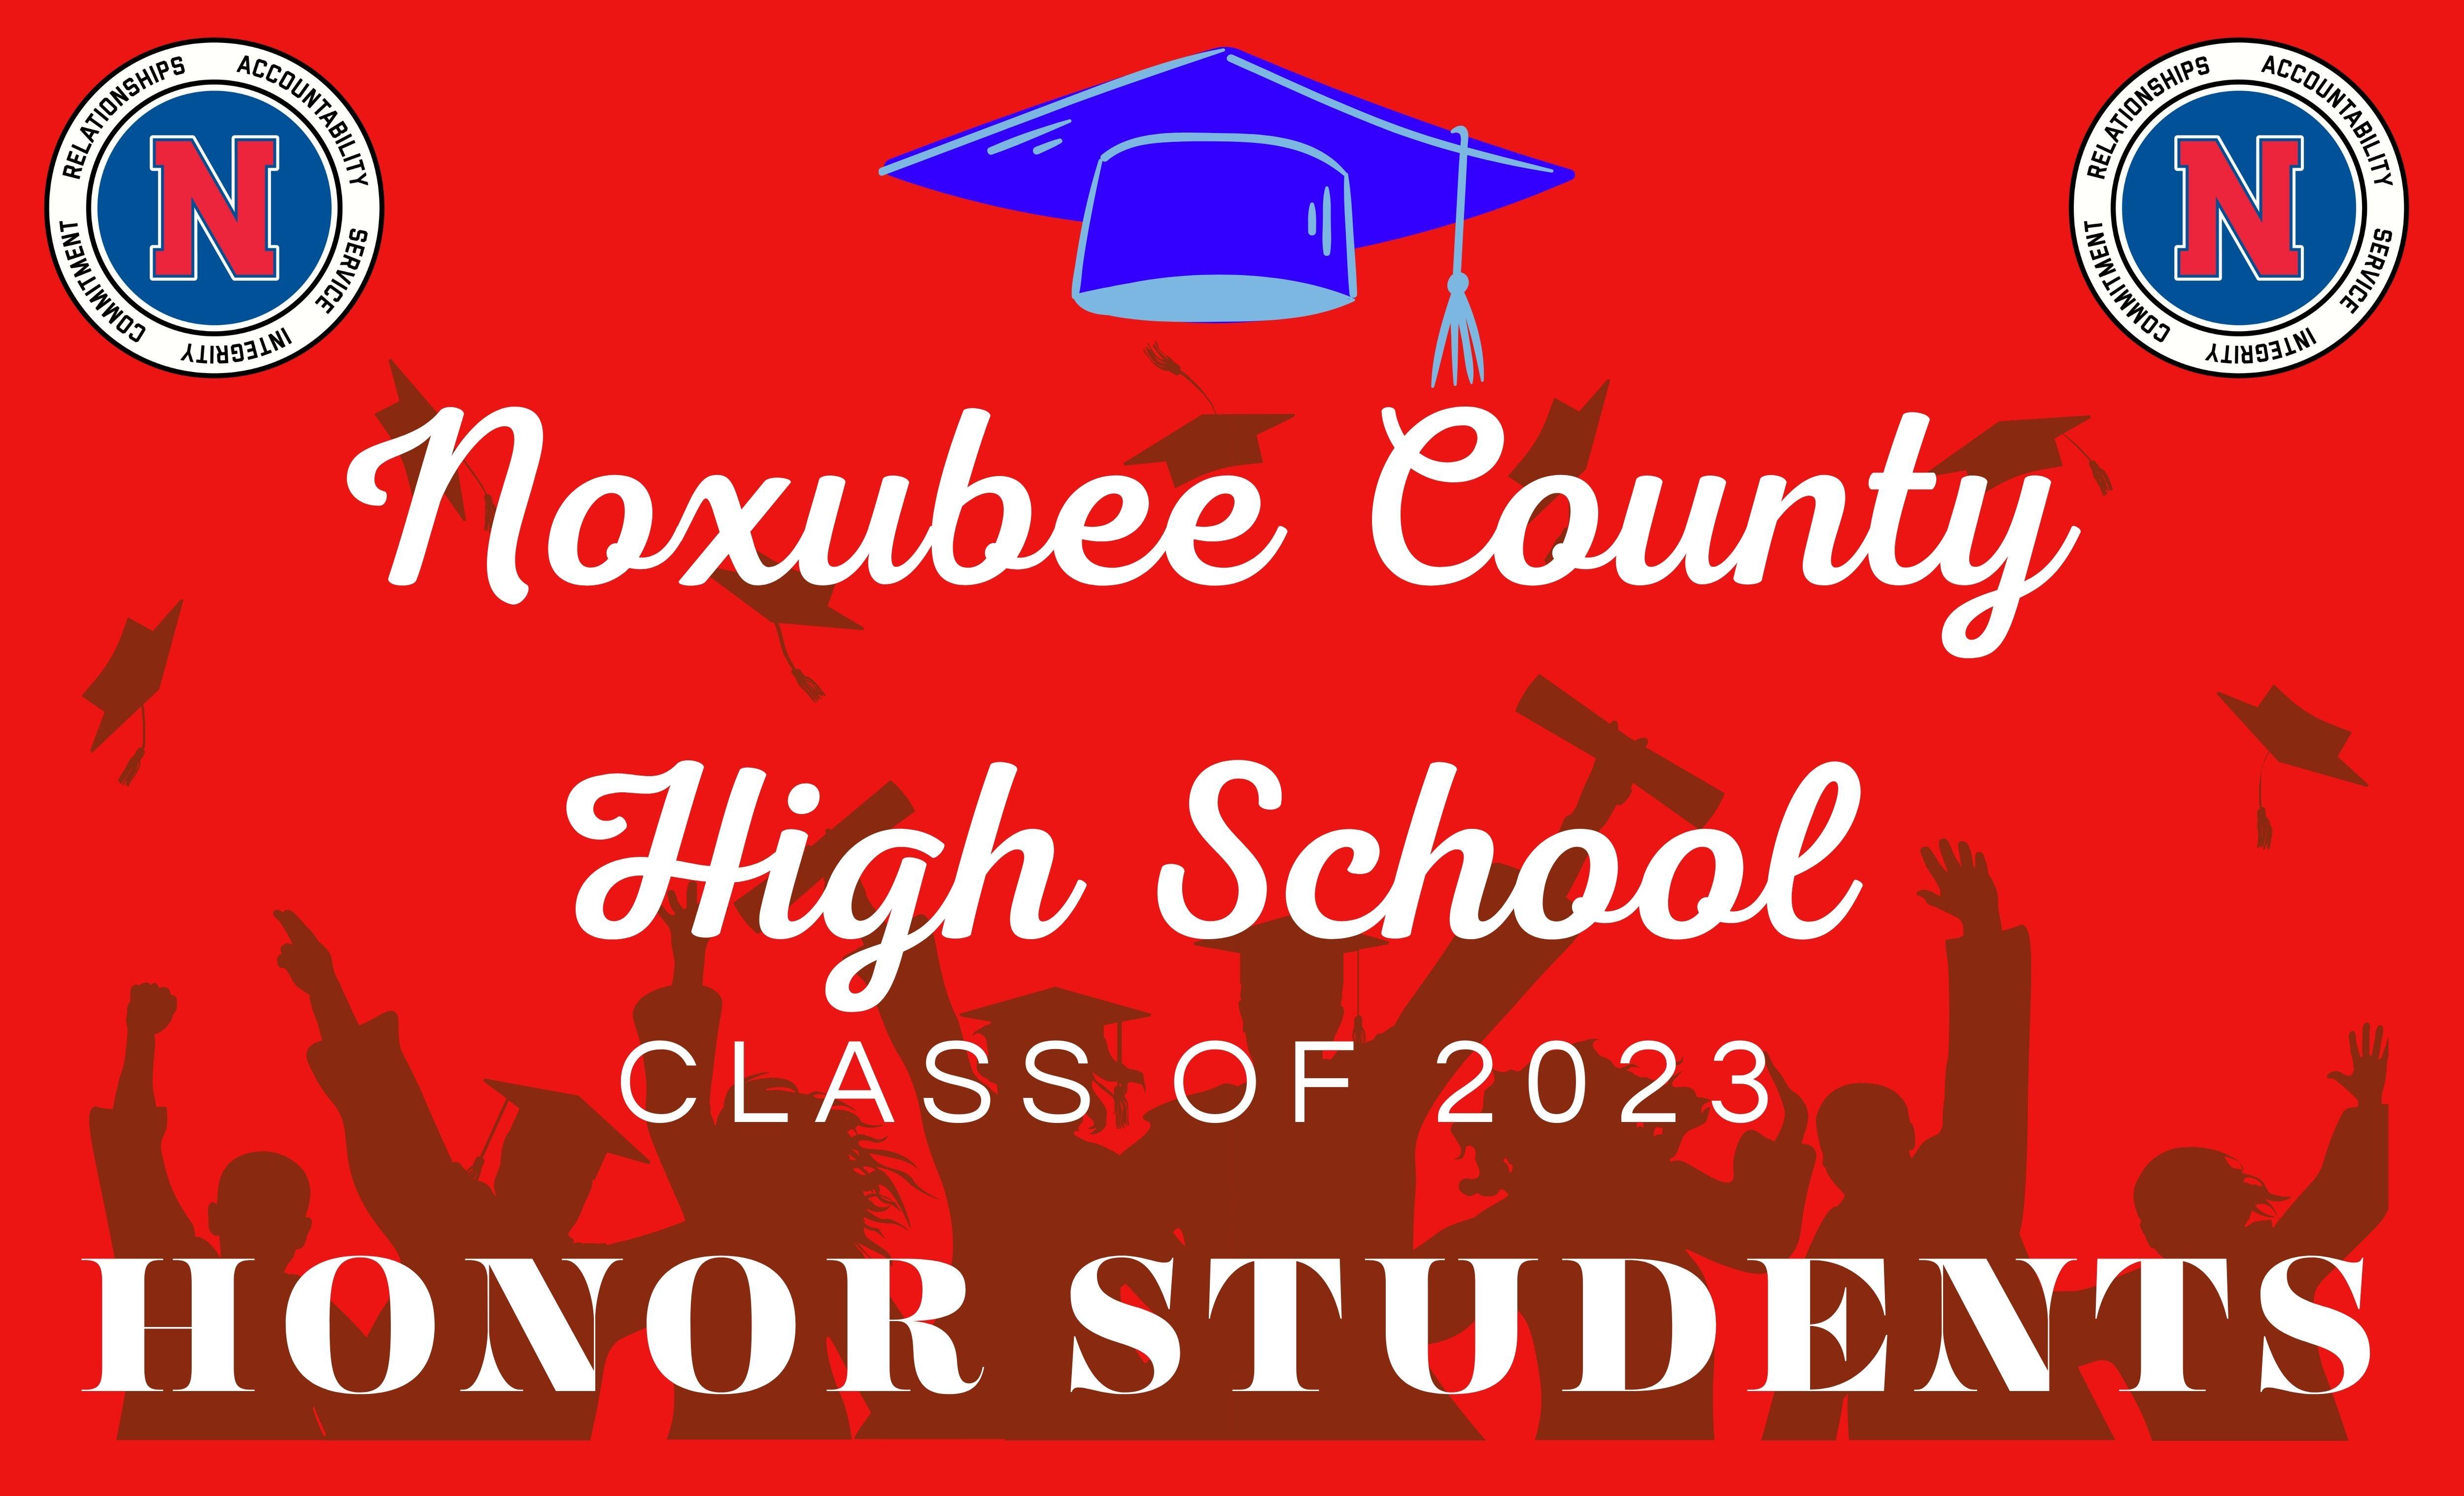 Class of 2023 Honor Students